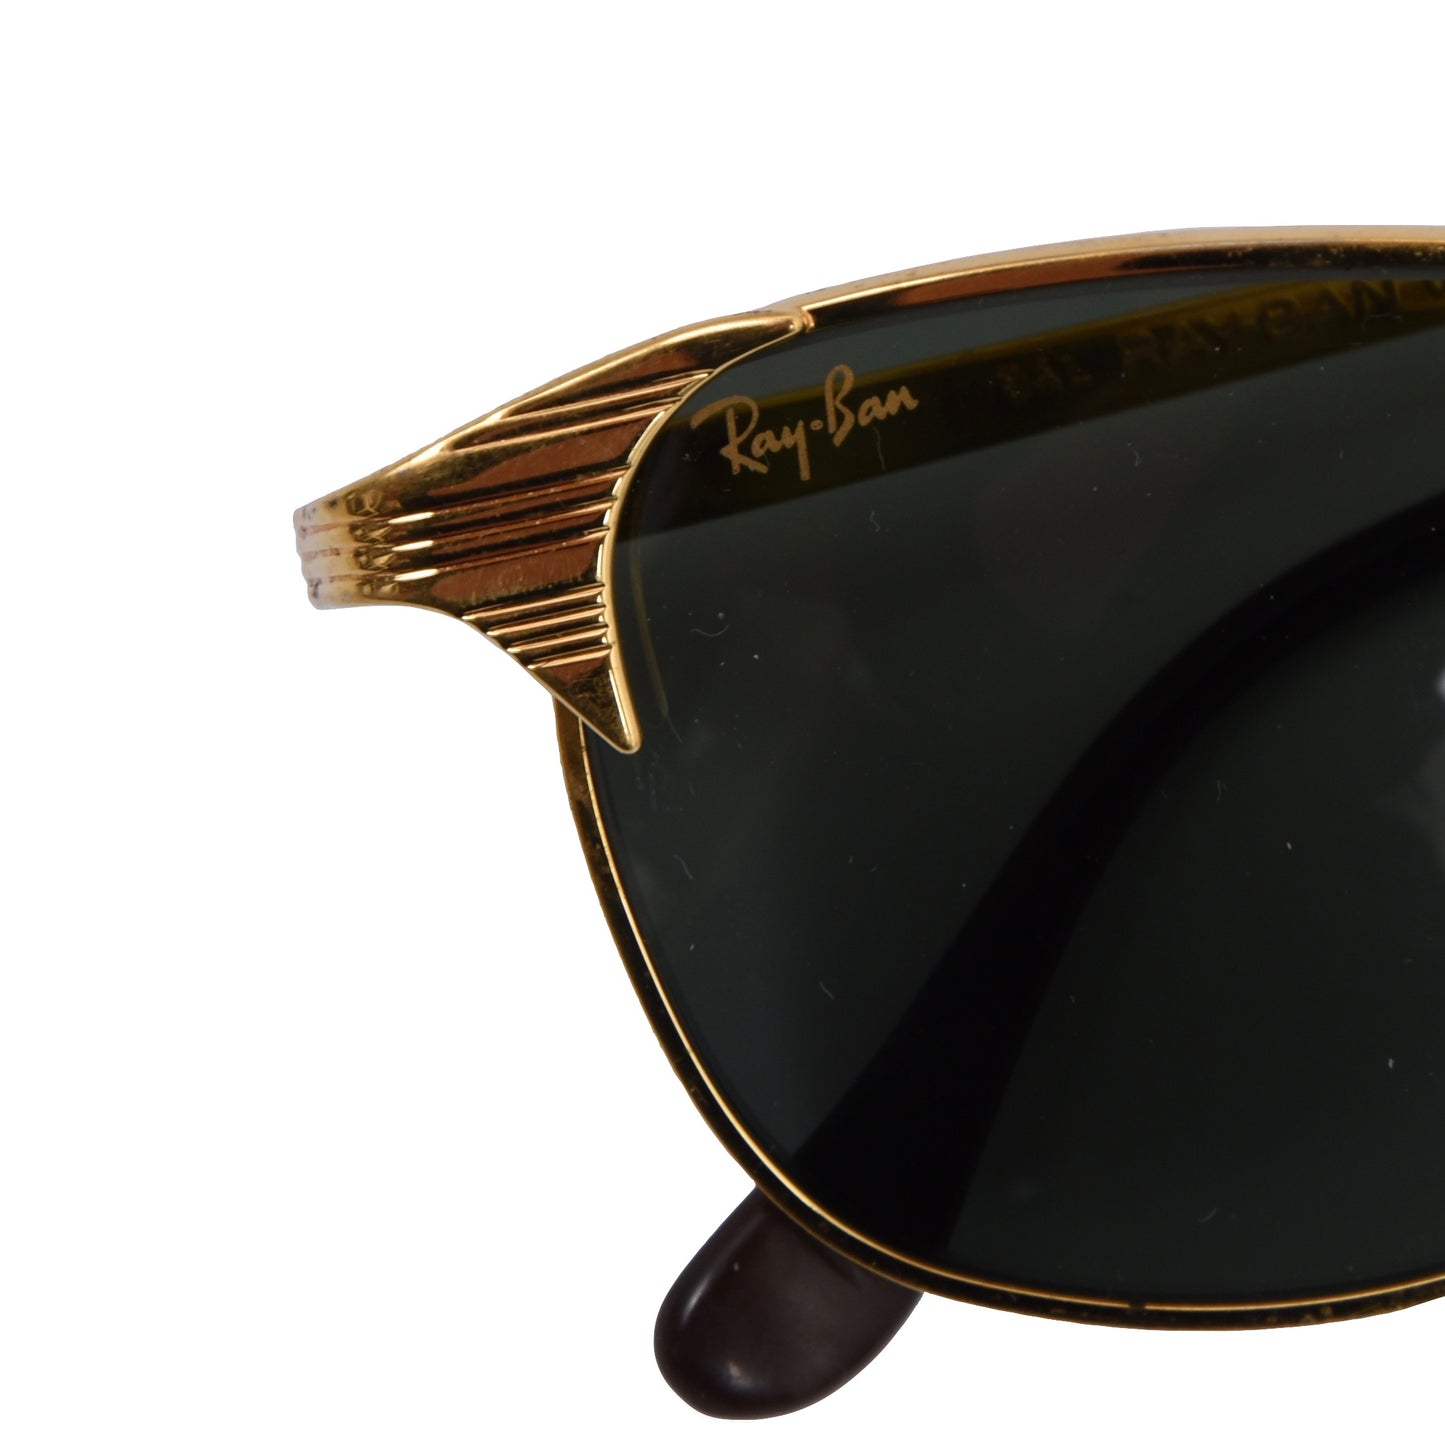 Bausch & Lomb Ray-Ban Signet Sunglasses - Gold